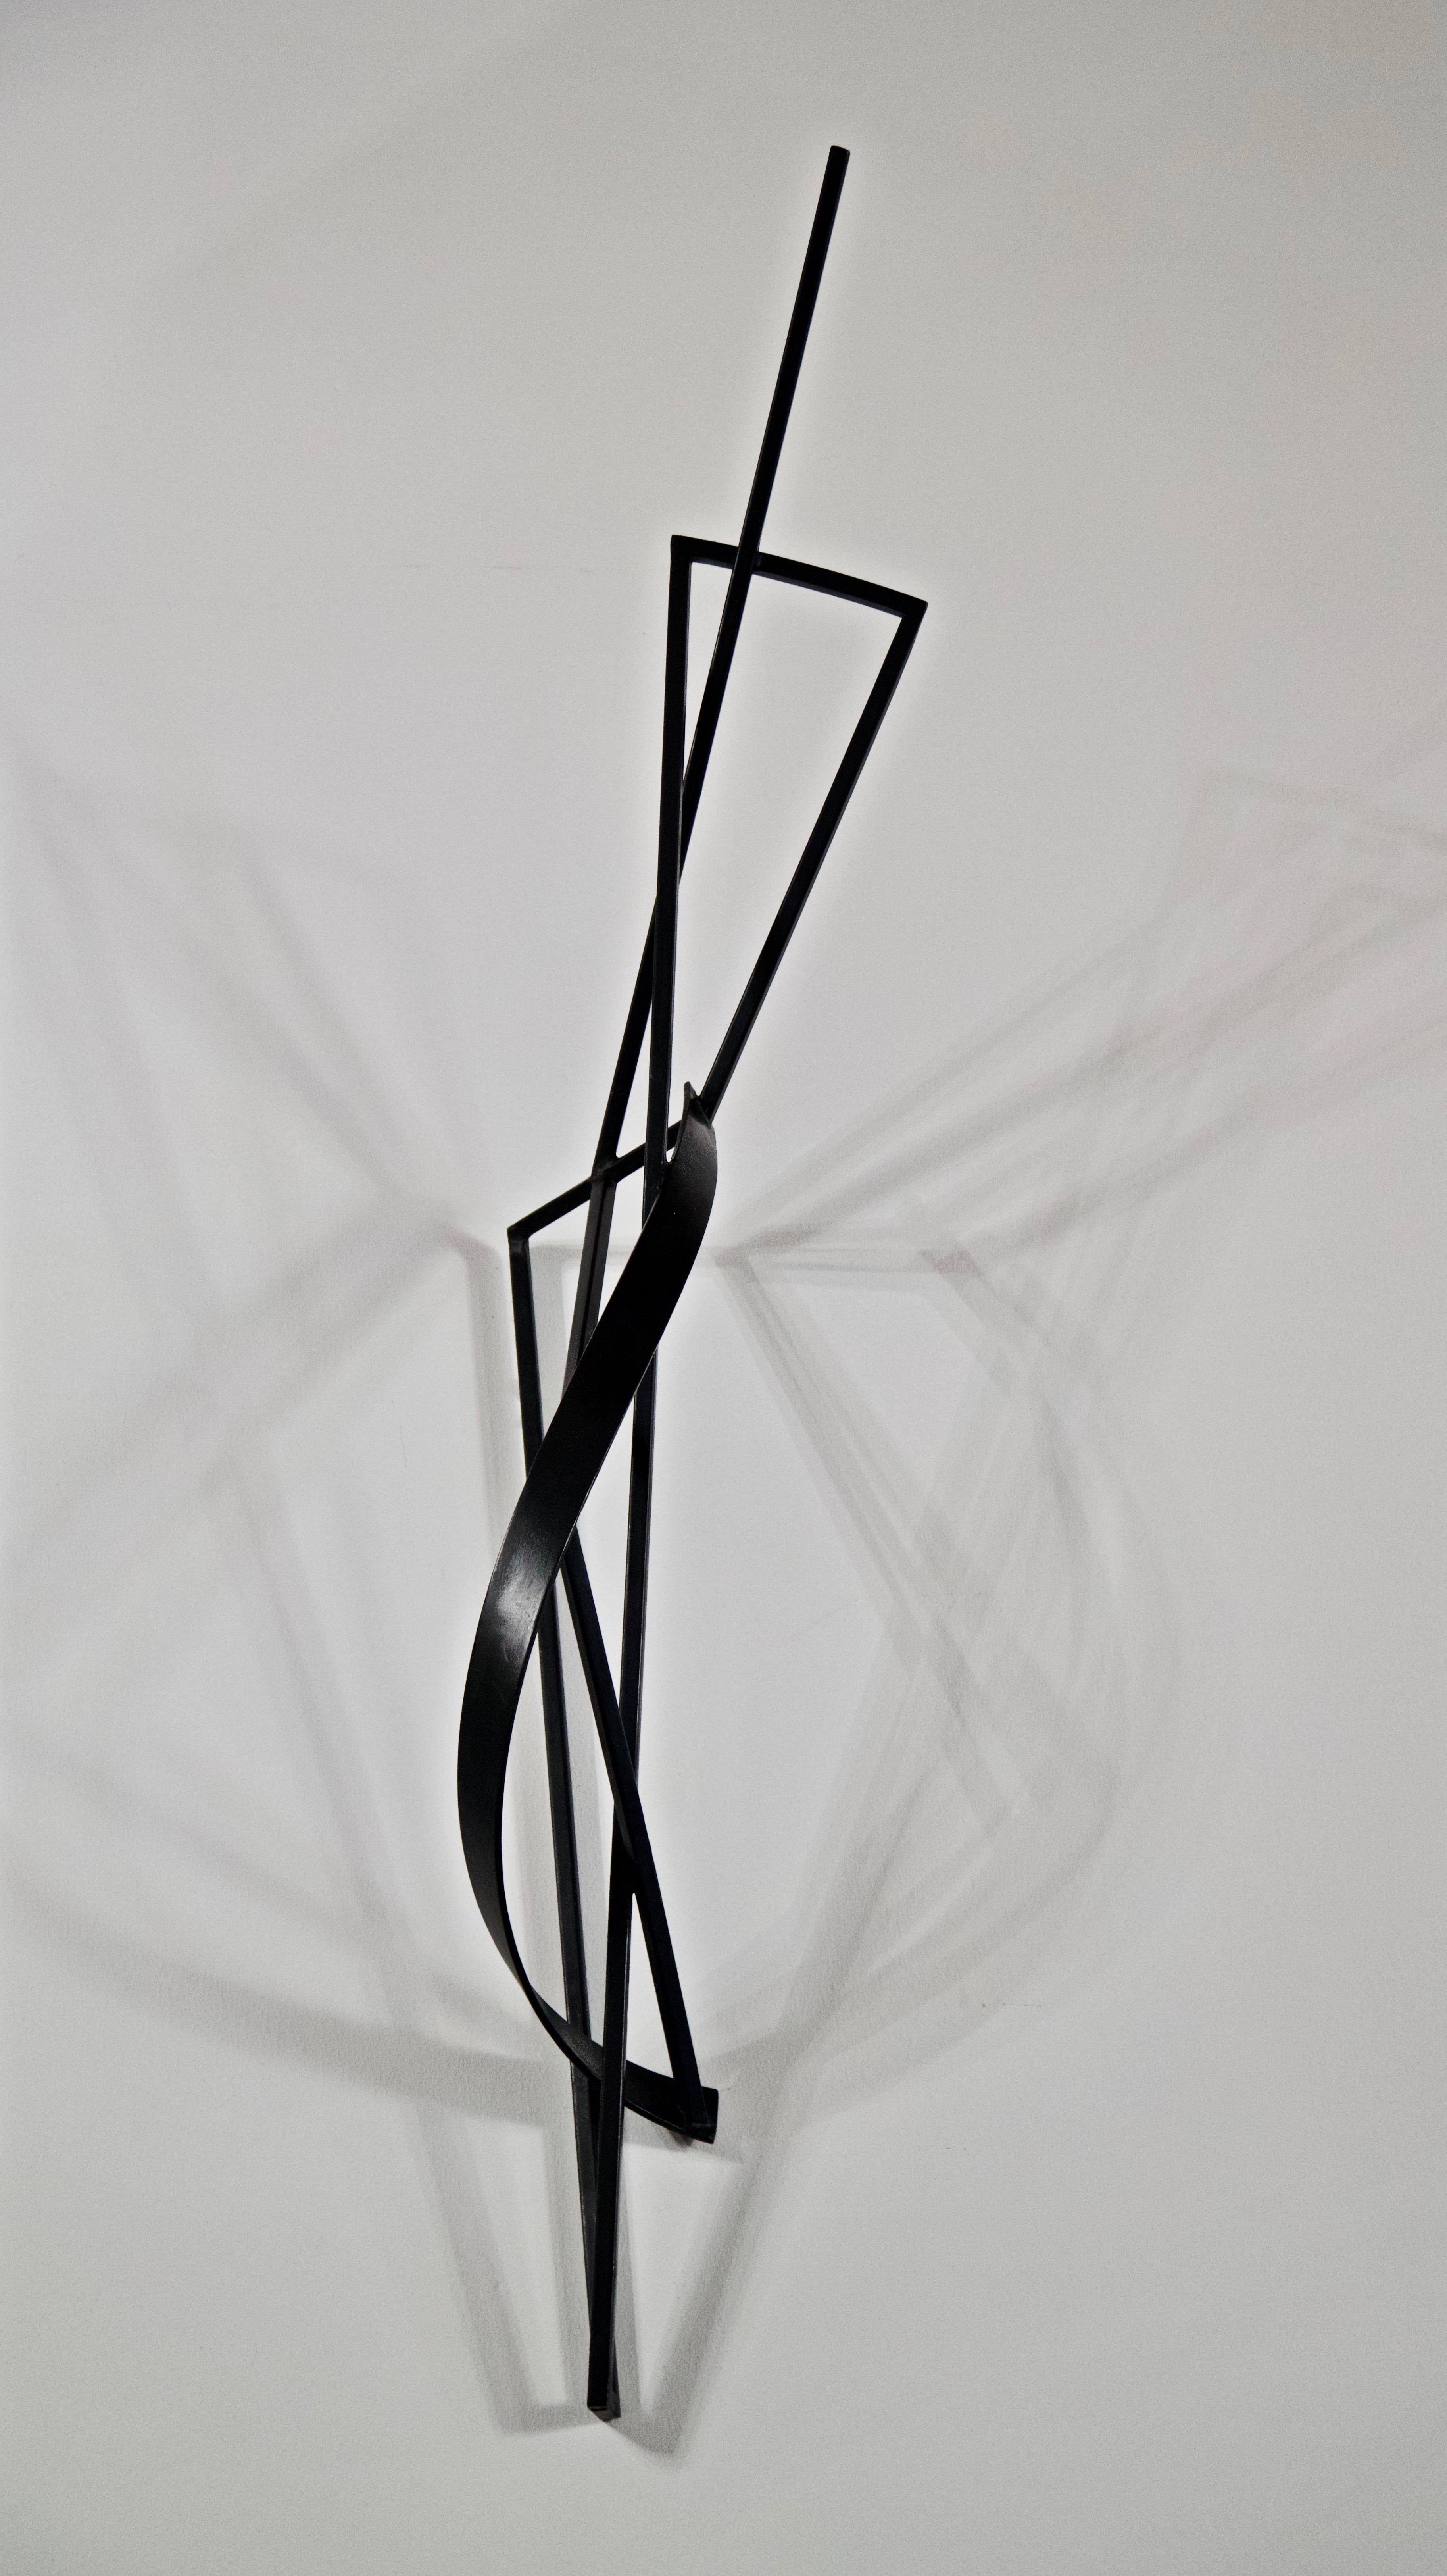 American Contemporary Steel Wall Sculpture Signed by Tom Hollenback For Sale